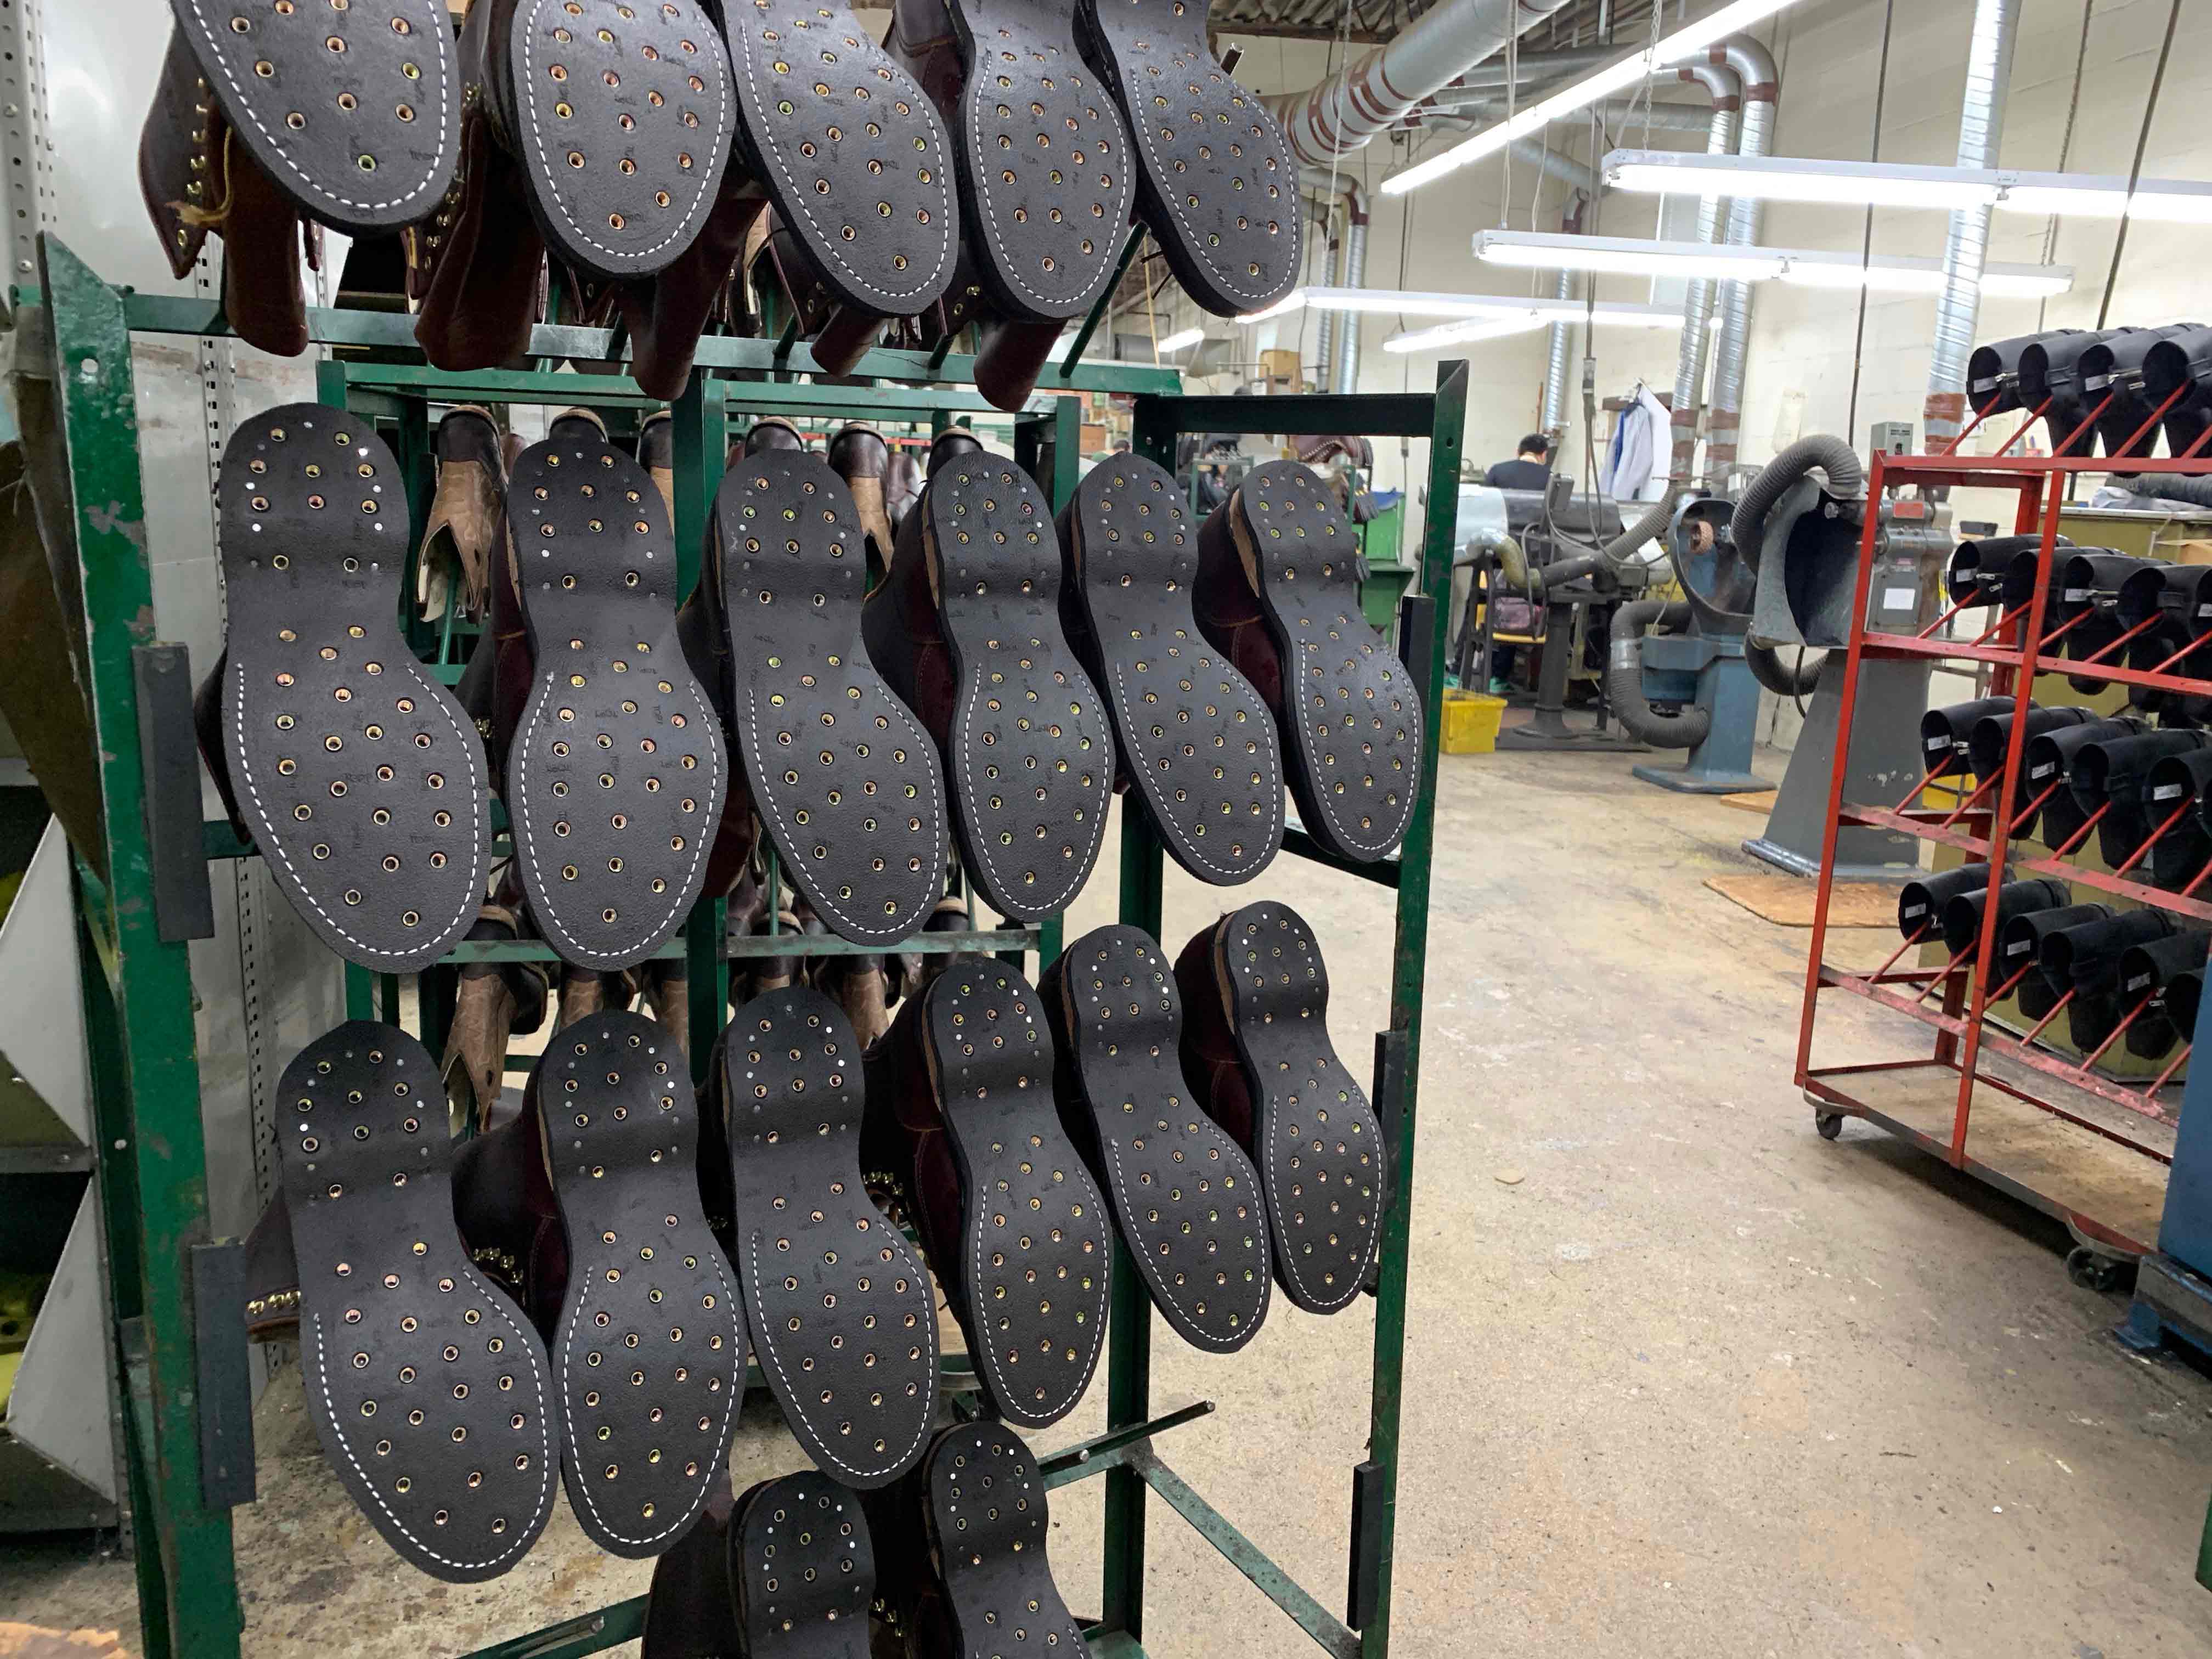 The shoes sit on racks, waiting for the next stage of the process.